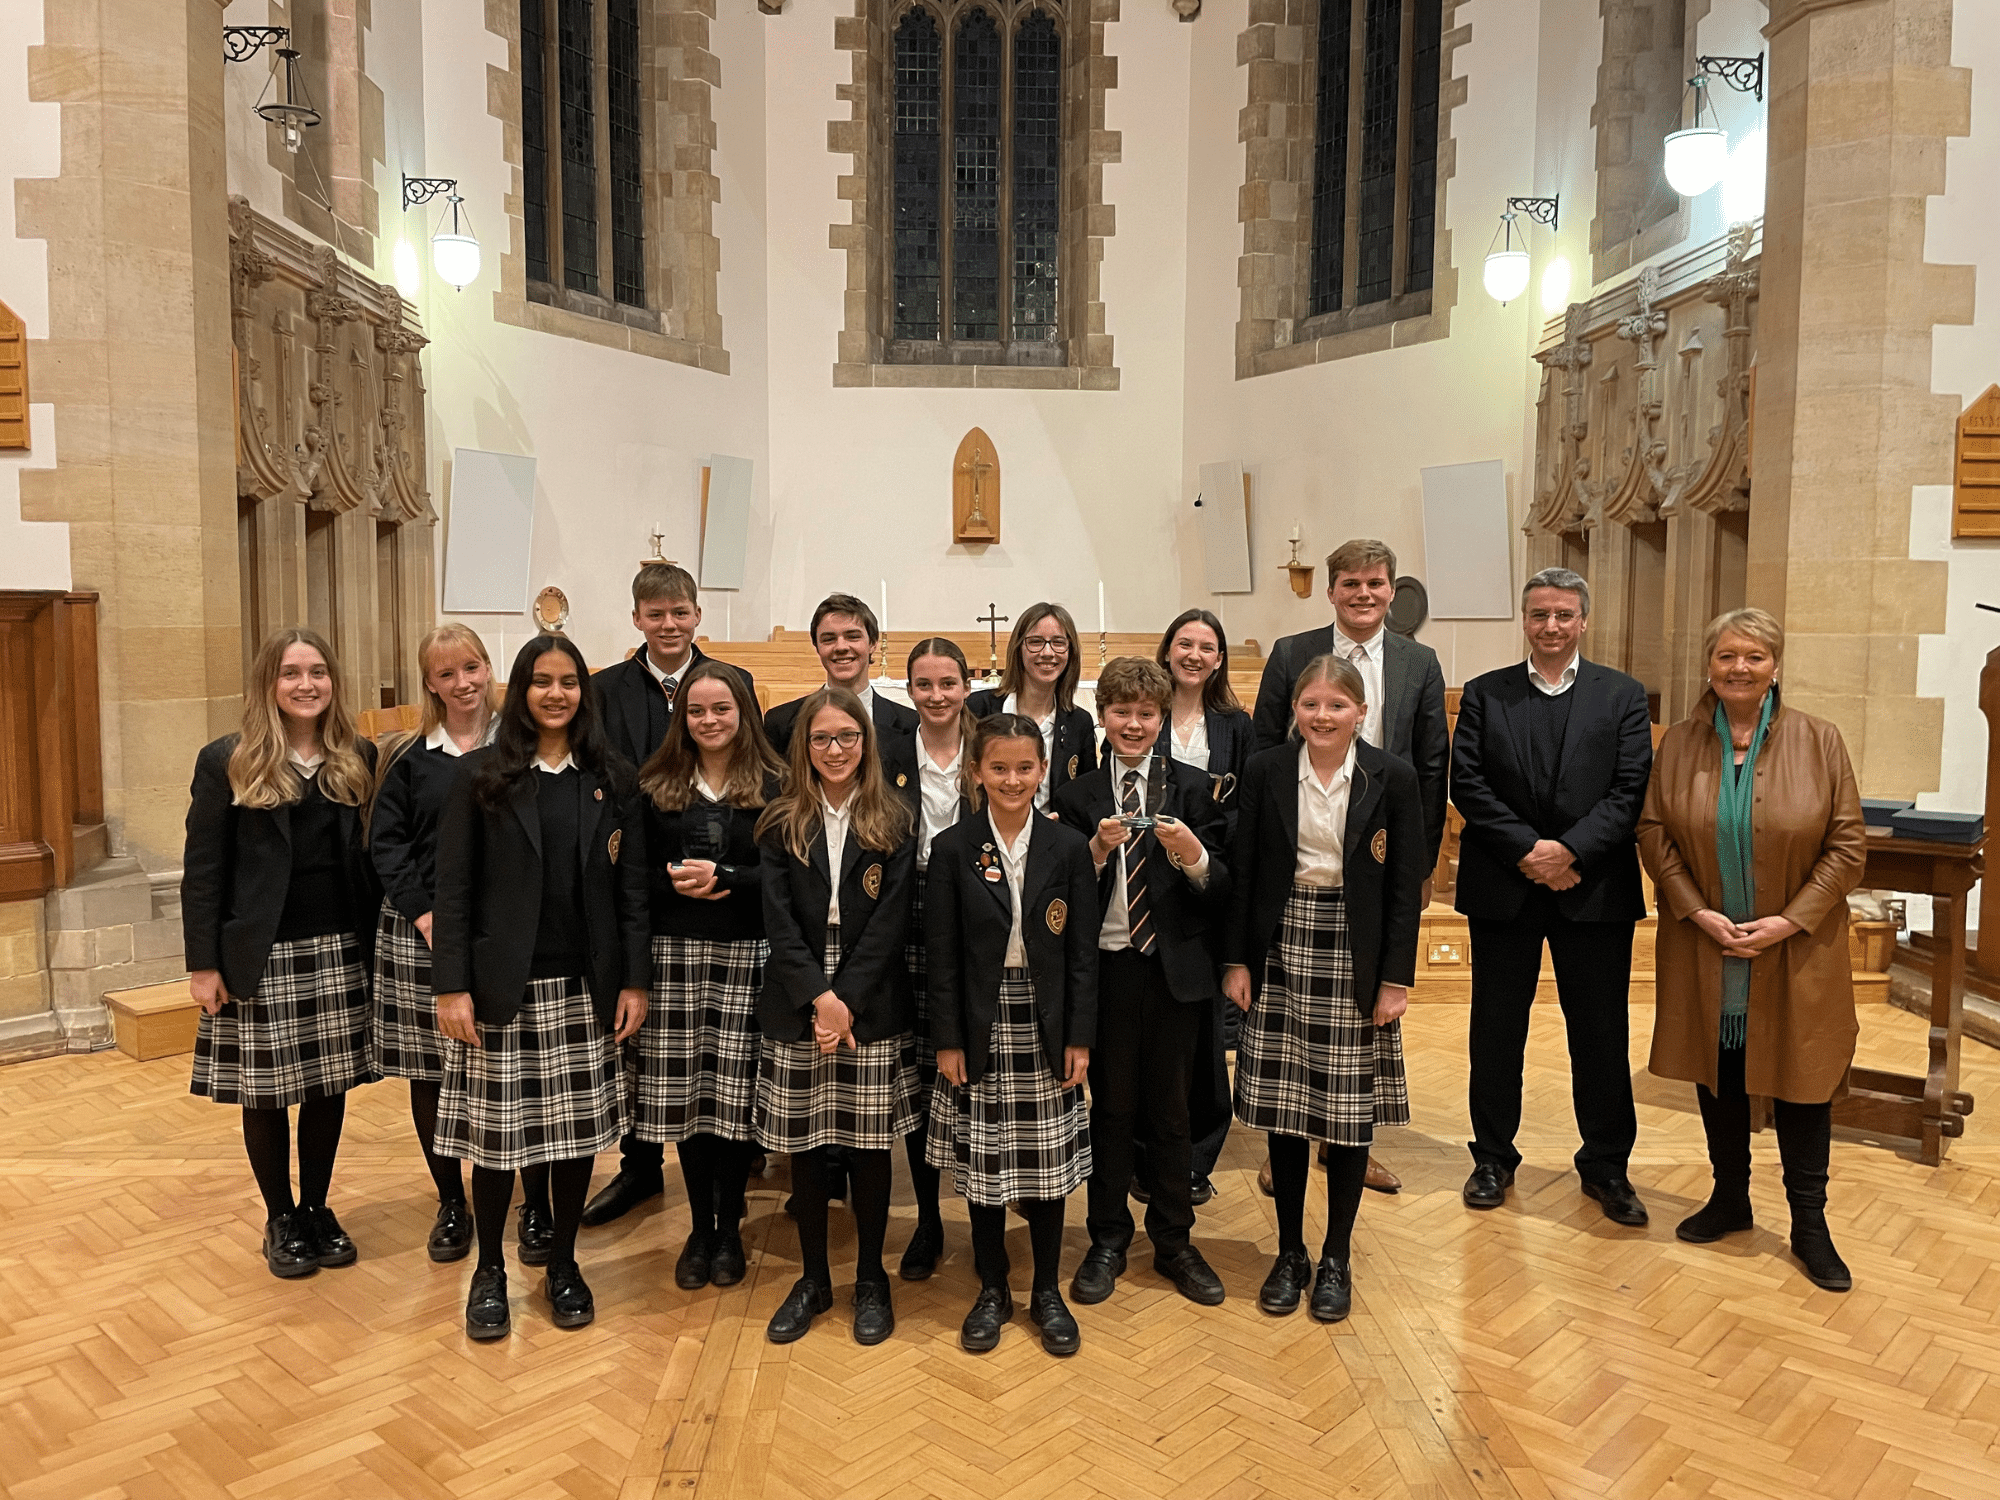 The 14 students who performed in the singing competition final, with the two adjudicators